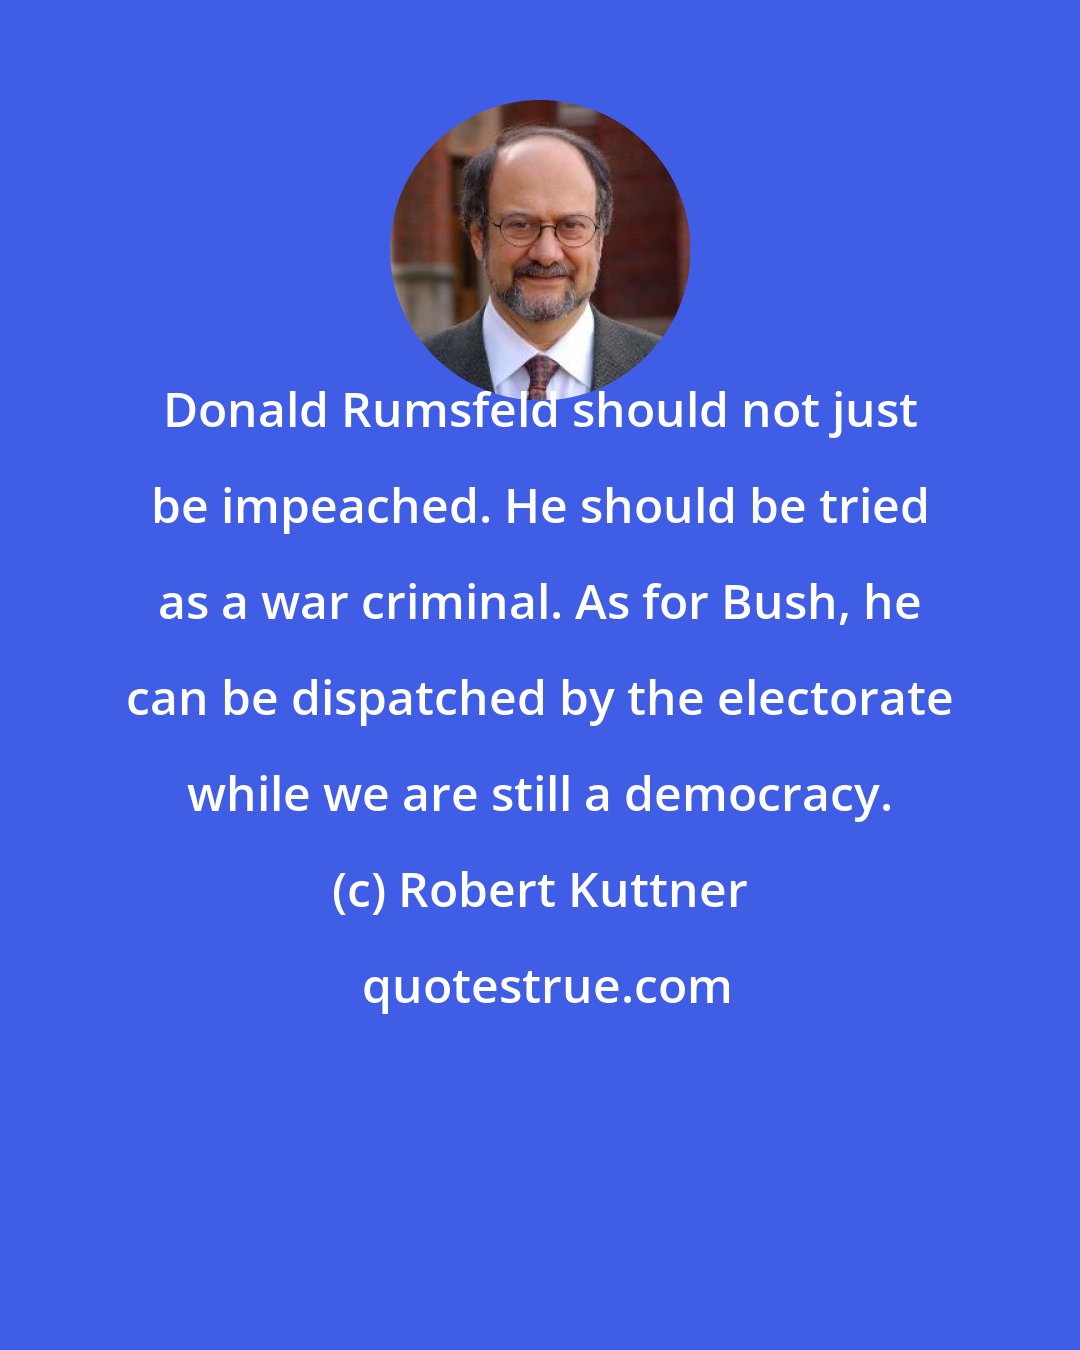 Robert Kuttner: Donald Rumsfeld should not just be impeached. He should be tried as a war criminal. As for Bush, he can be dispatched by the electorate while we are still a democracy.